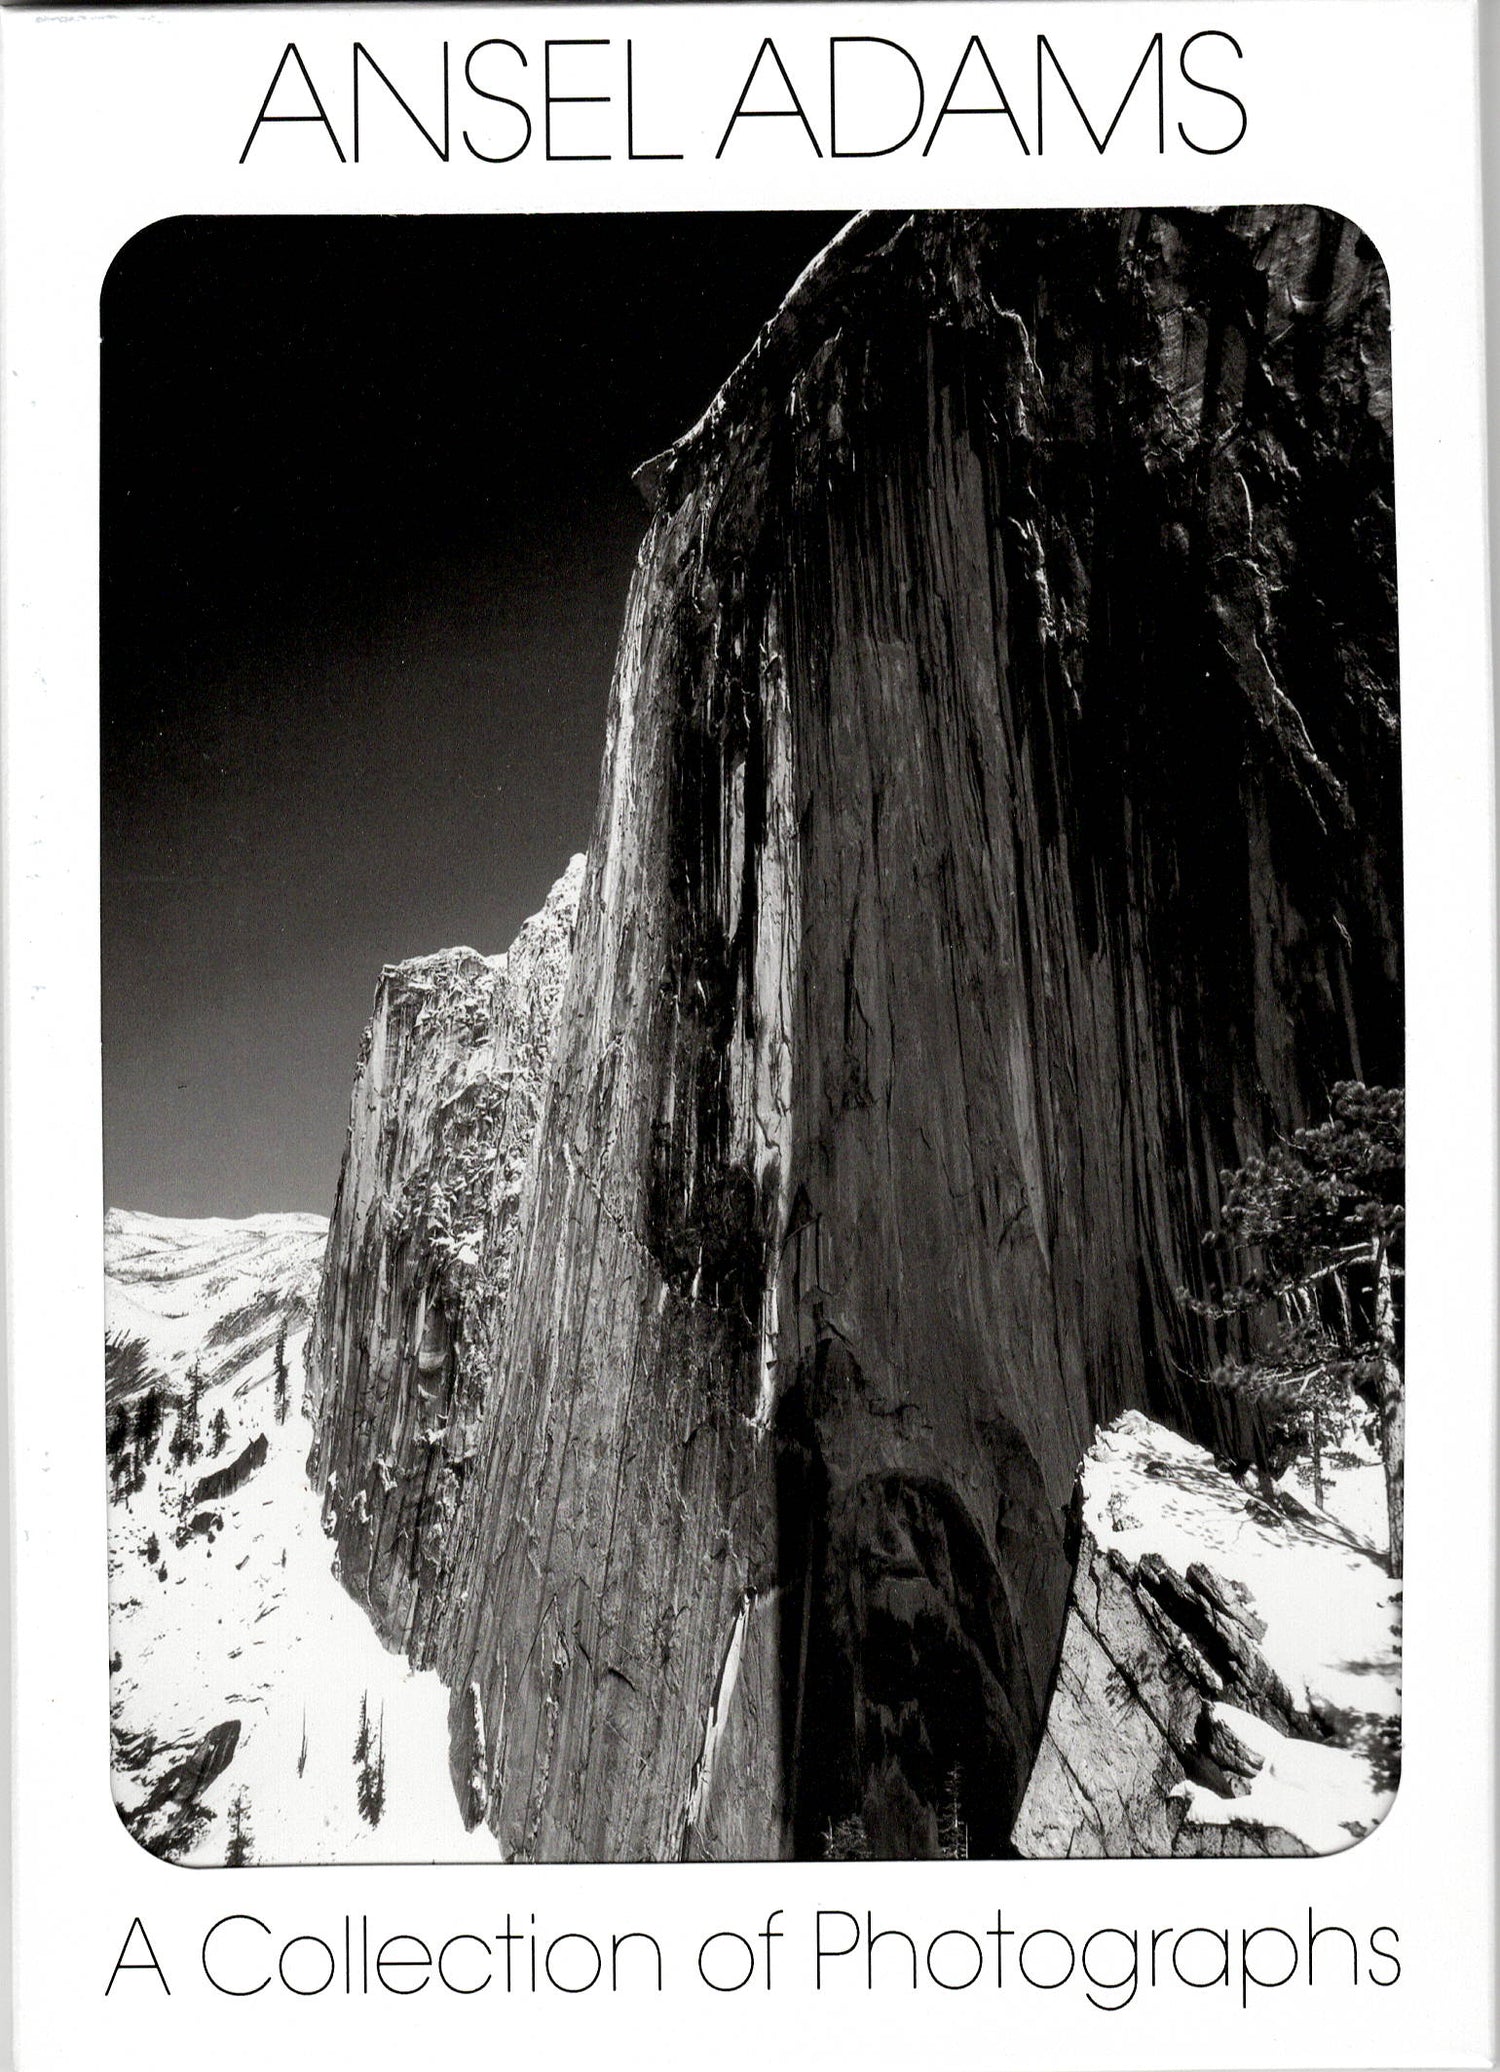 "A COLLECTION OF PHOTOGRAPHS" - ANSEL ADAMS LARGE POSTCARD SET (10 ASSORTED POSTCARDS)